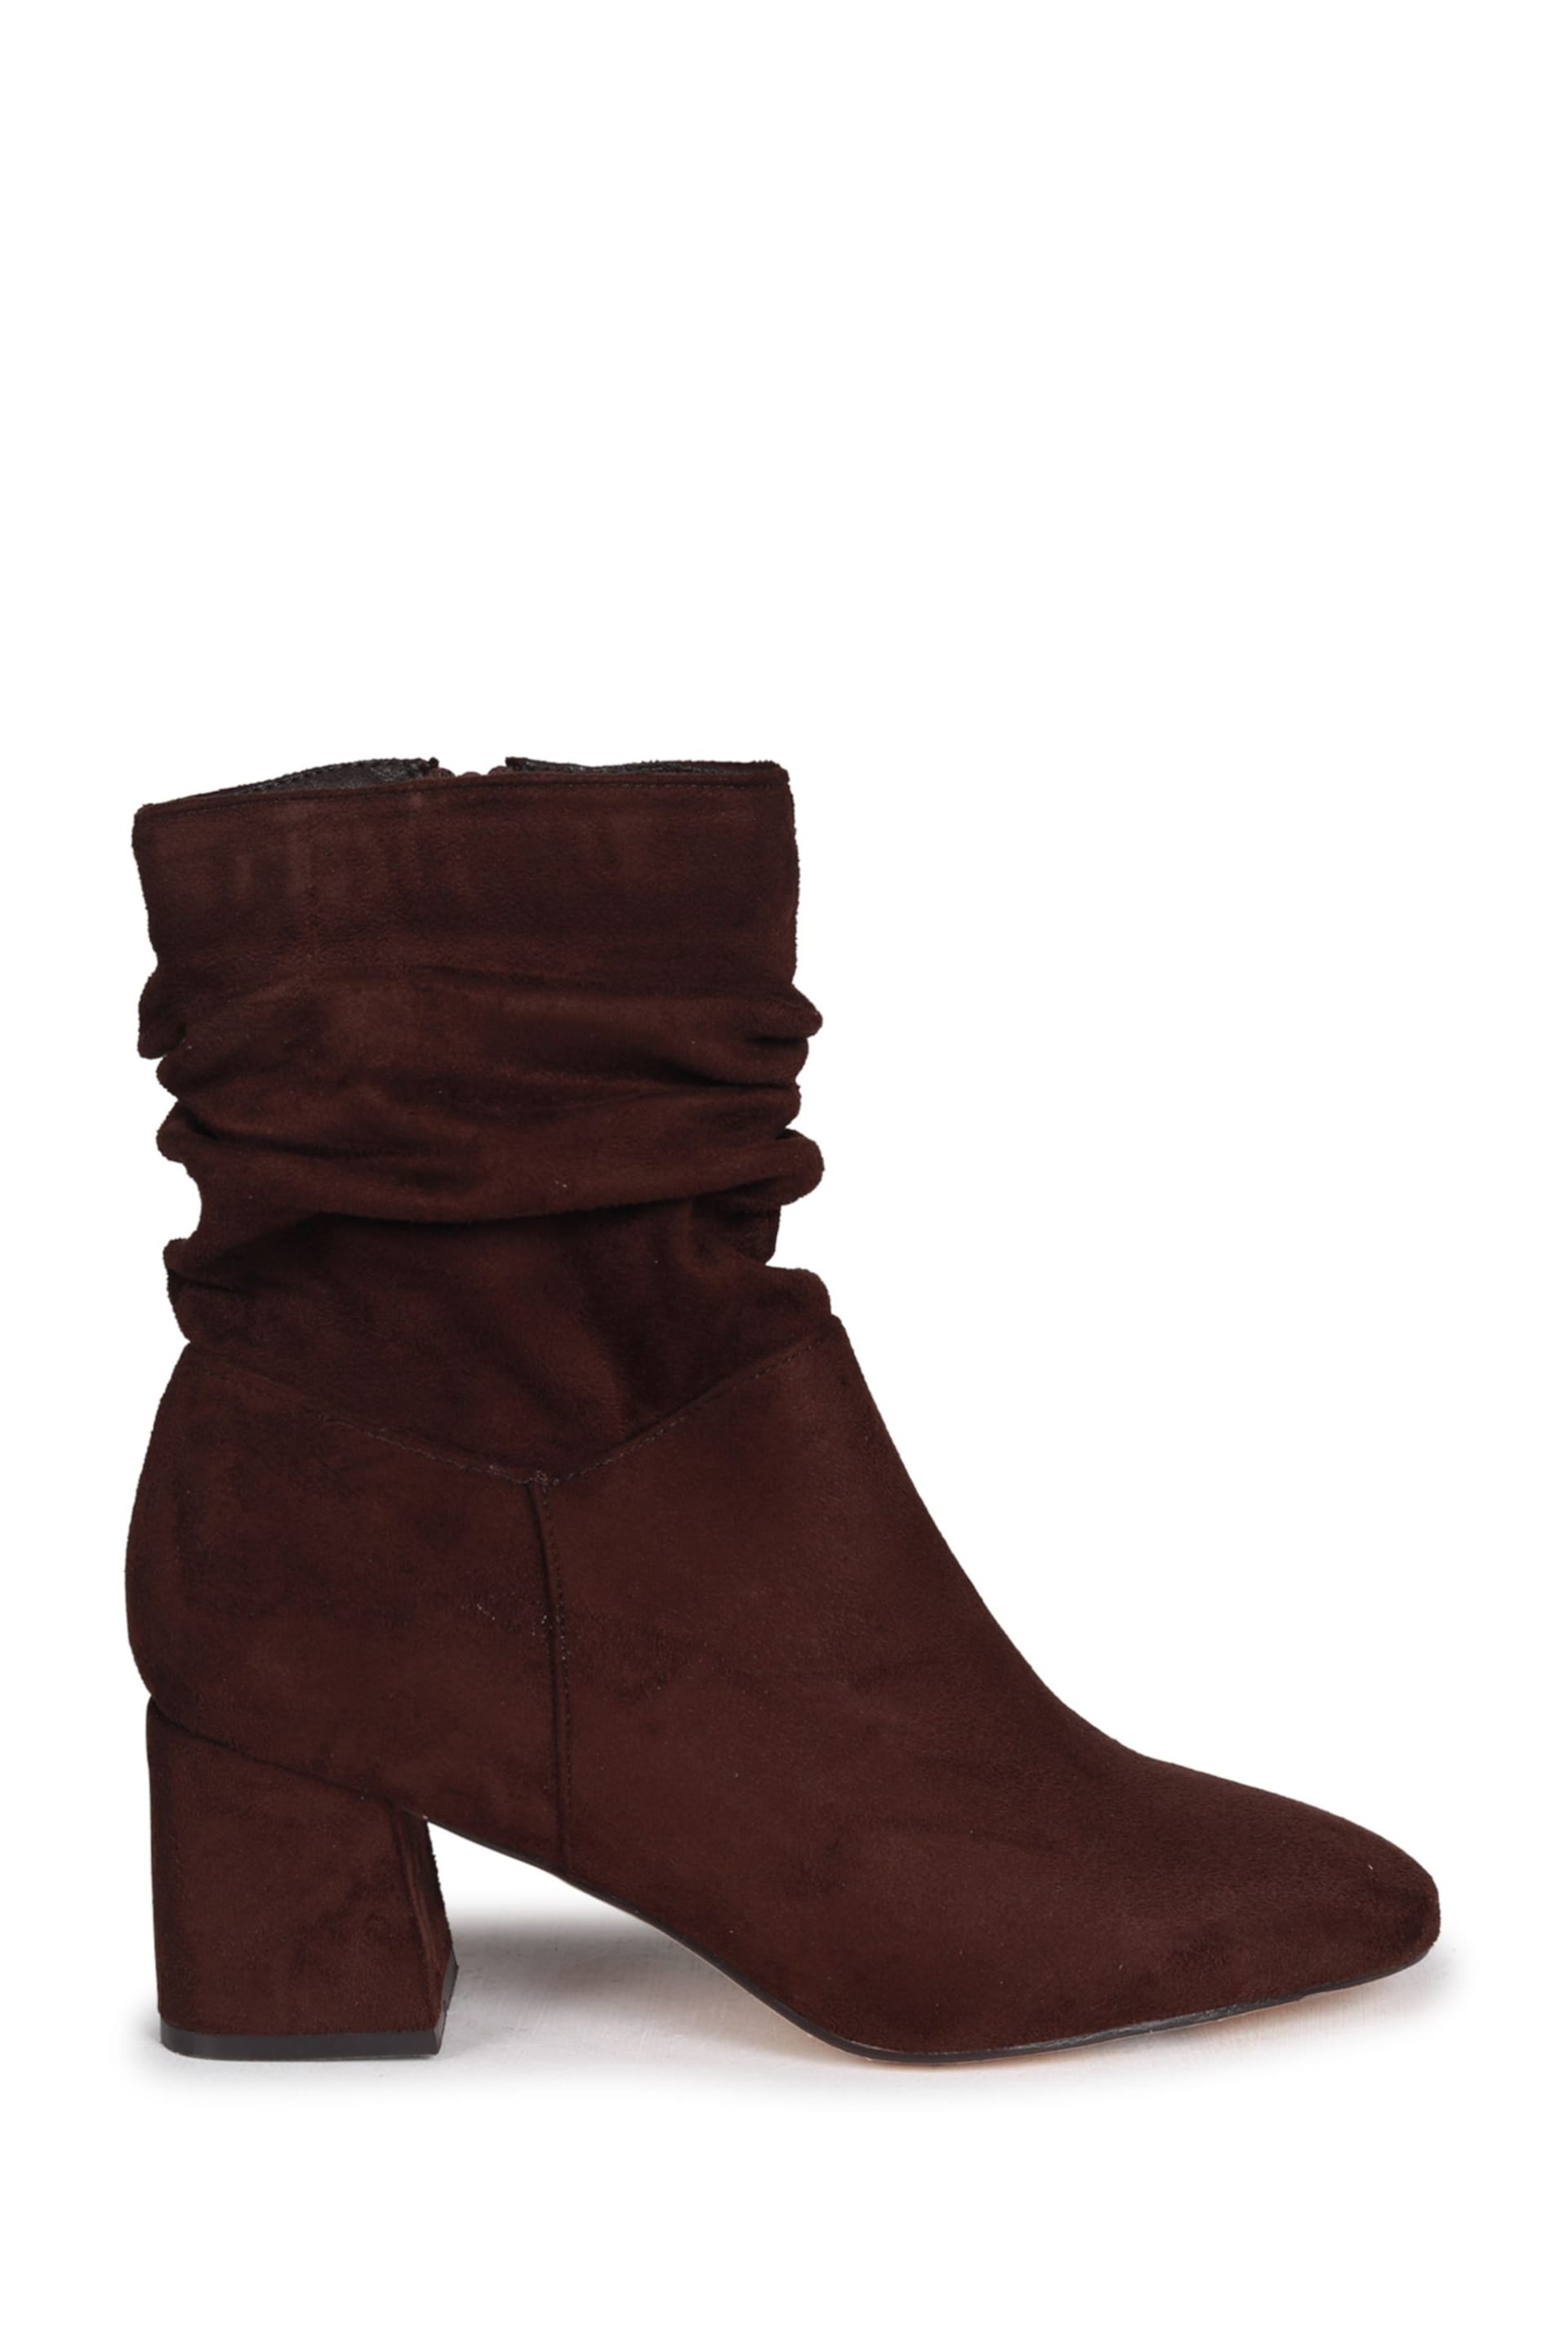 Linzi Brown Aster Ruched Heeled Ankle Boots - Image 2 of 4